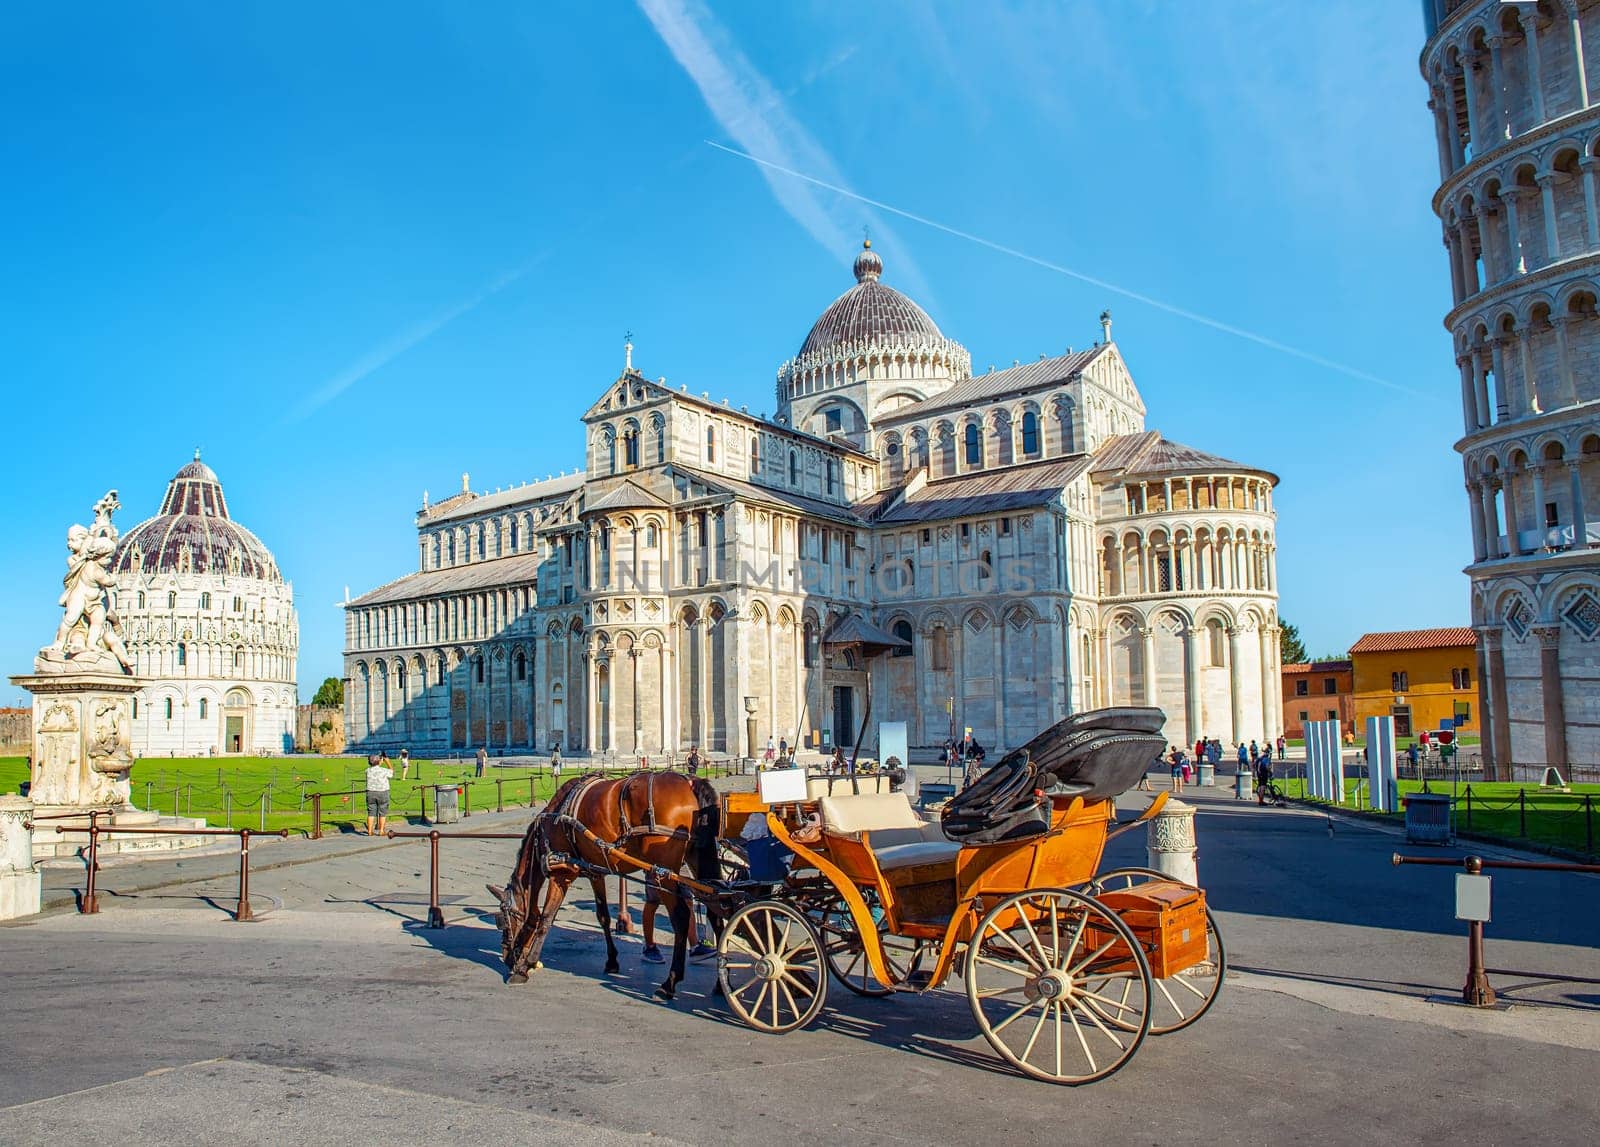 Horse carriage in Pisa by Givaga